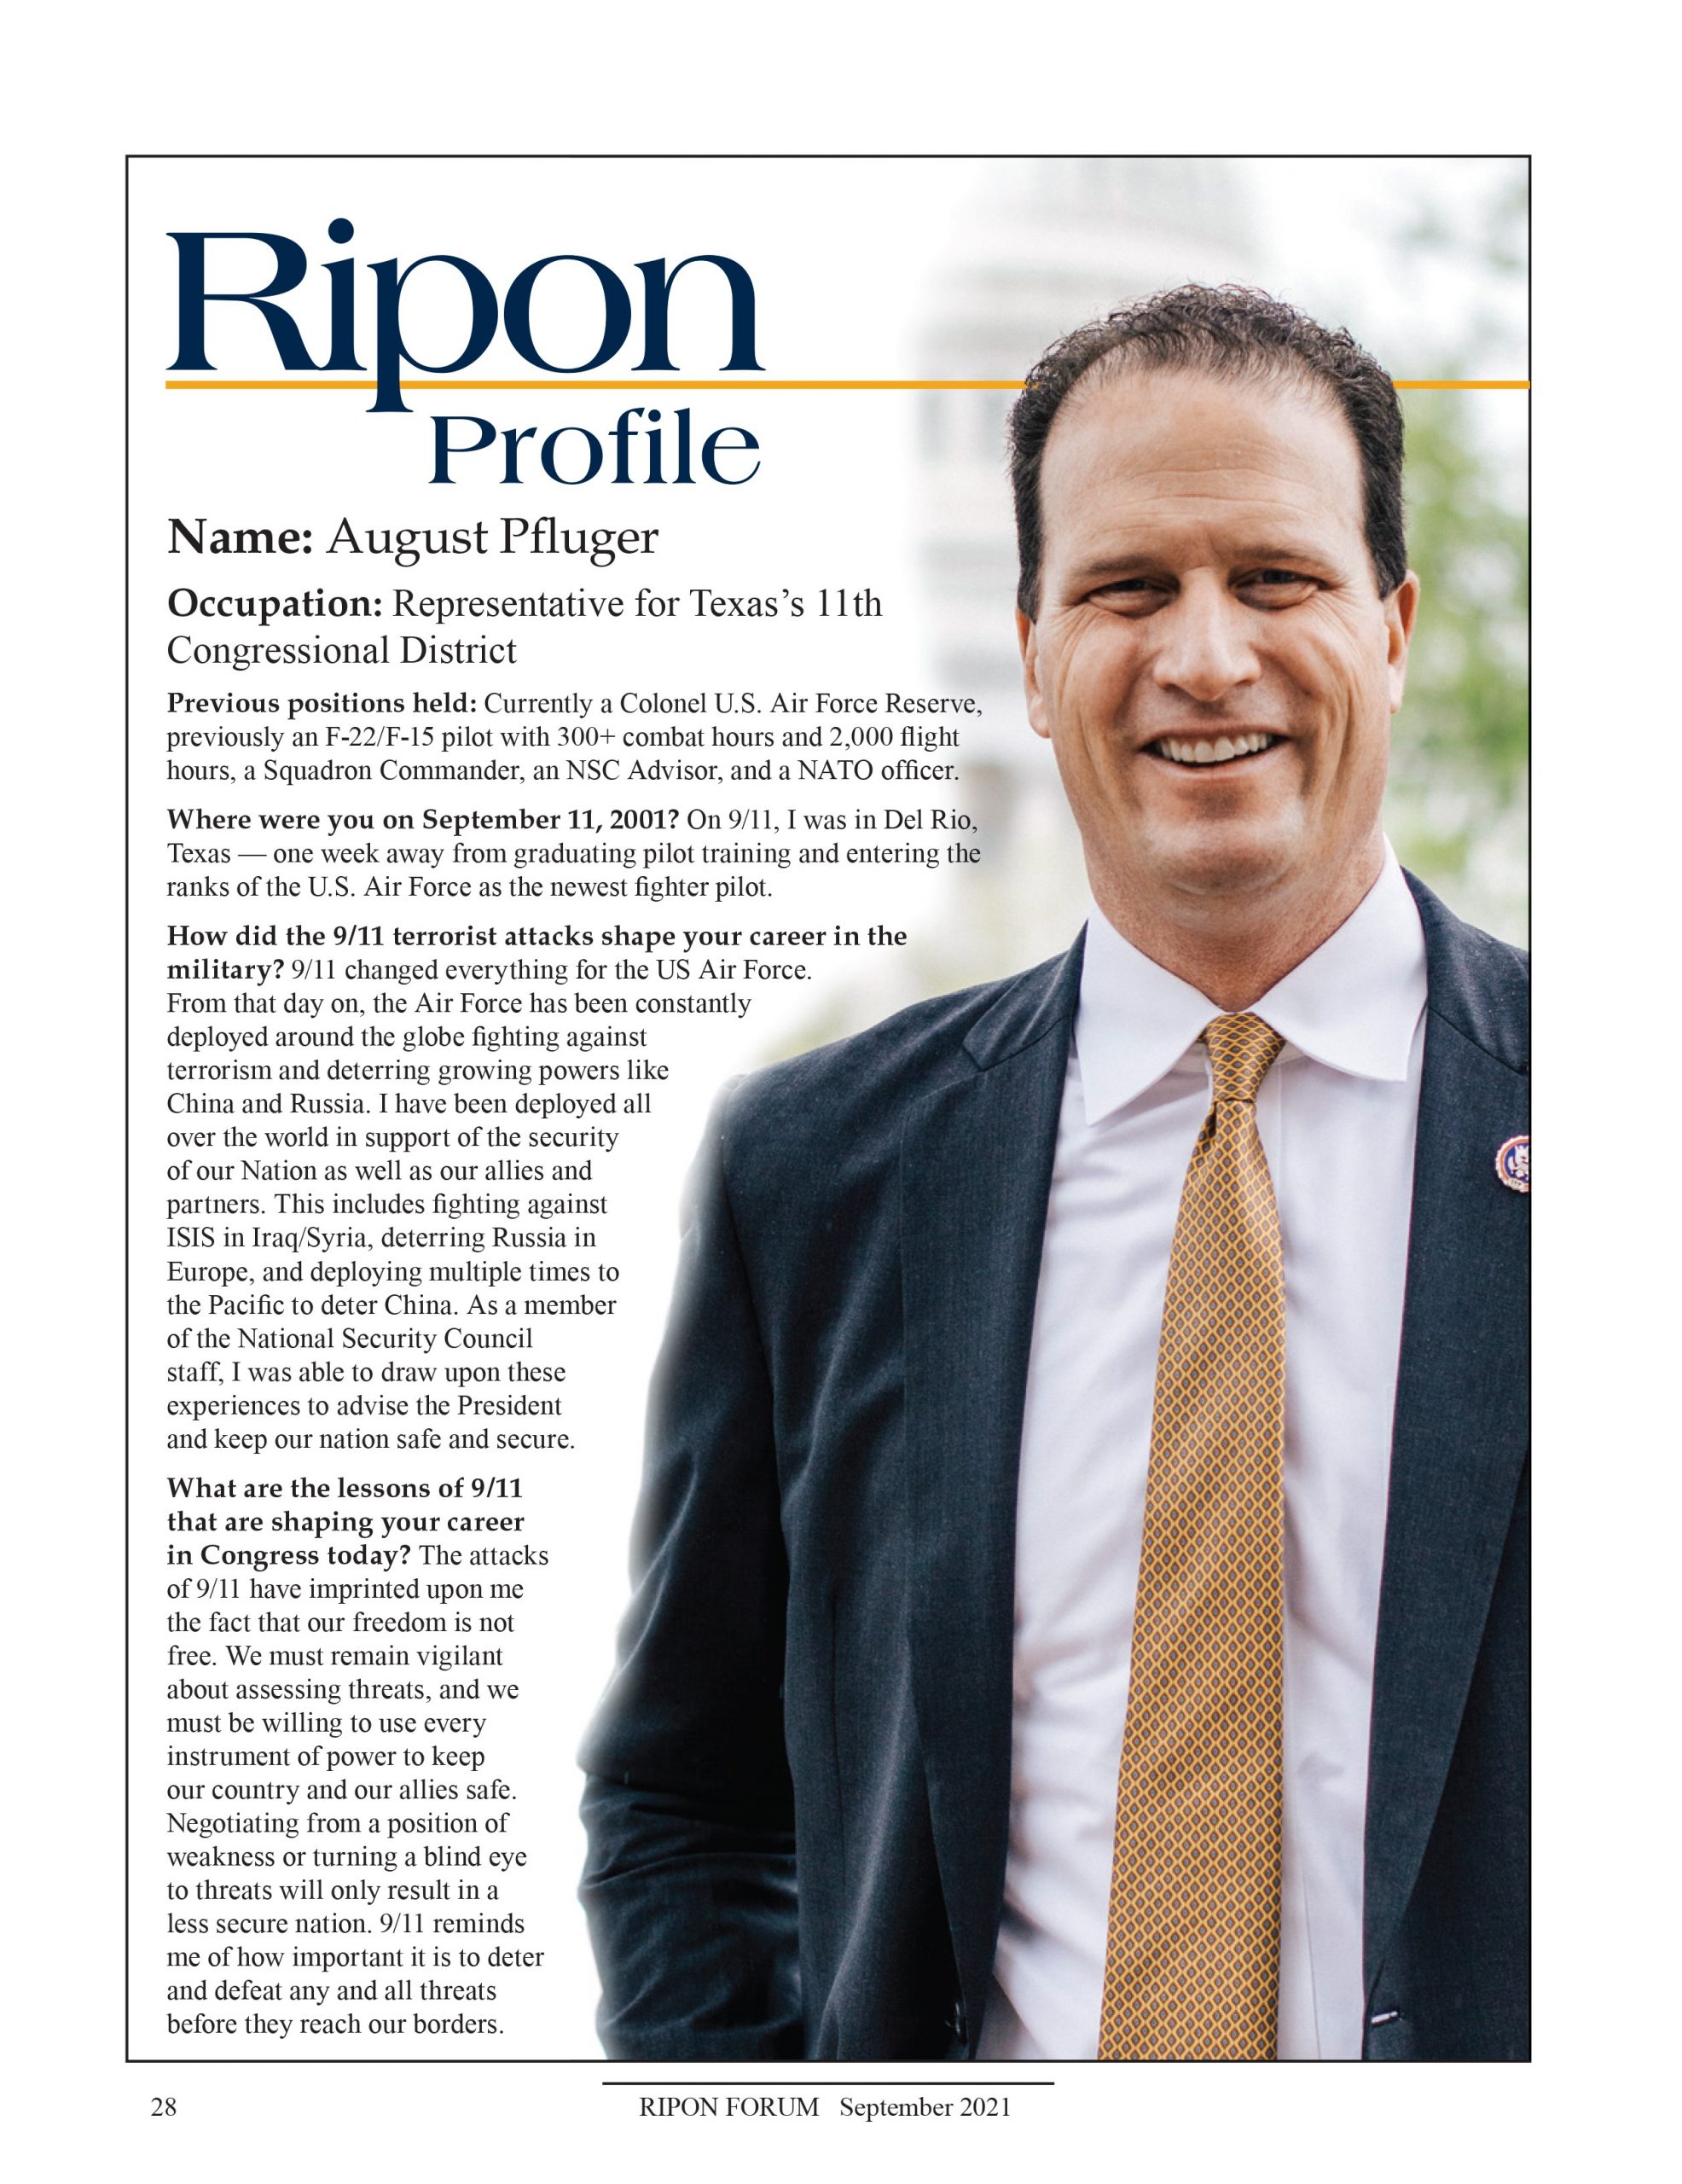 Ripon Profile of August Pfluger